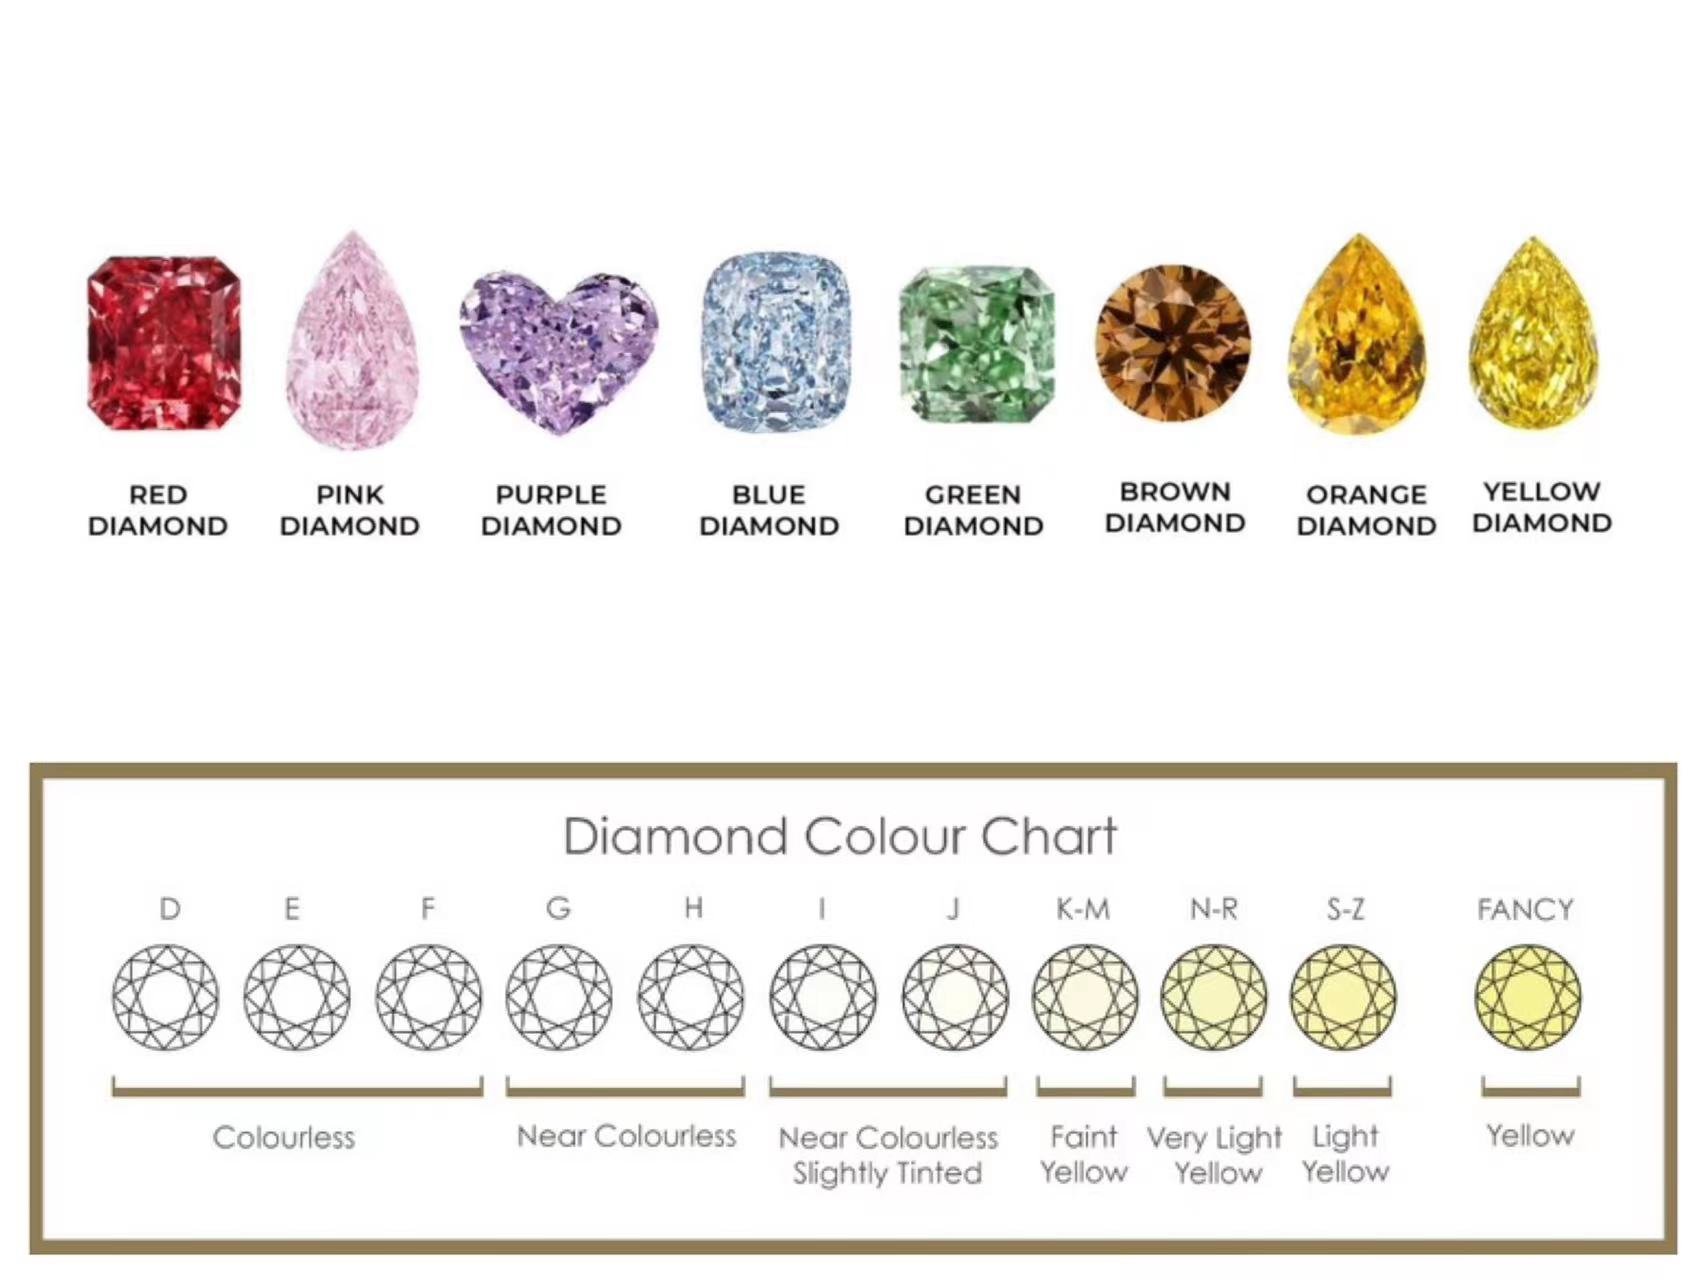 Christina Chao: Colour, from the '4Cs' of grading diamonds.